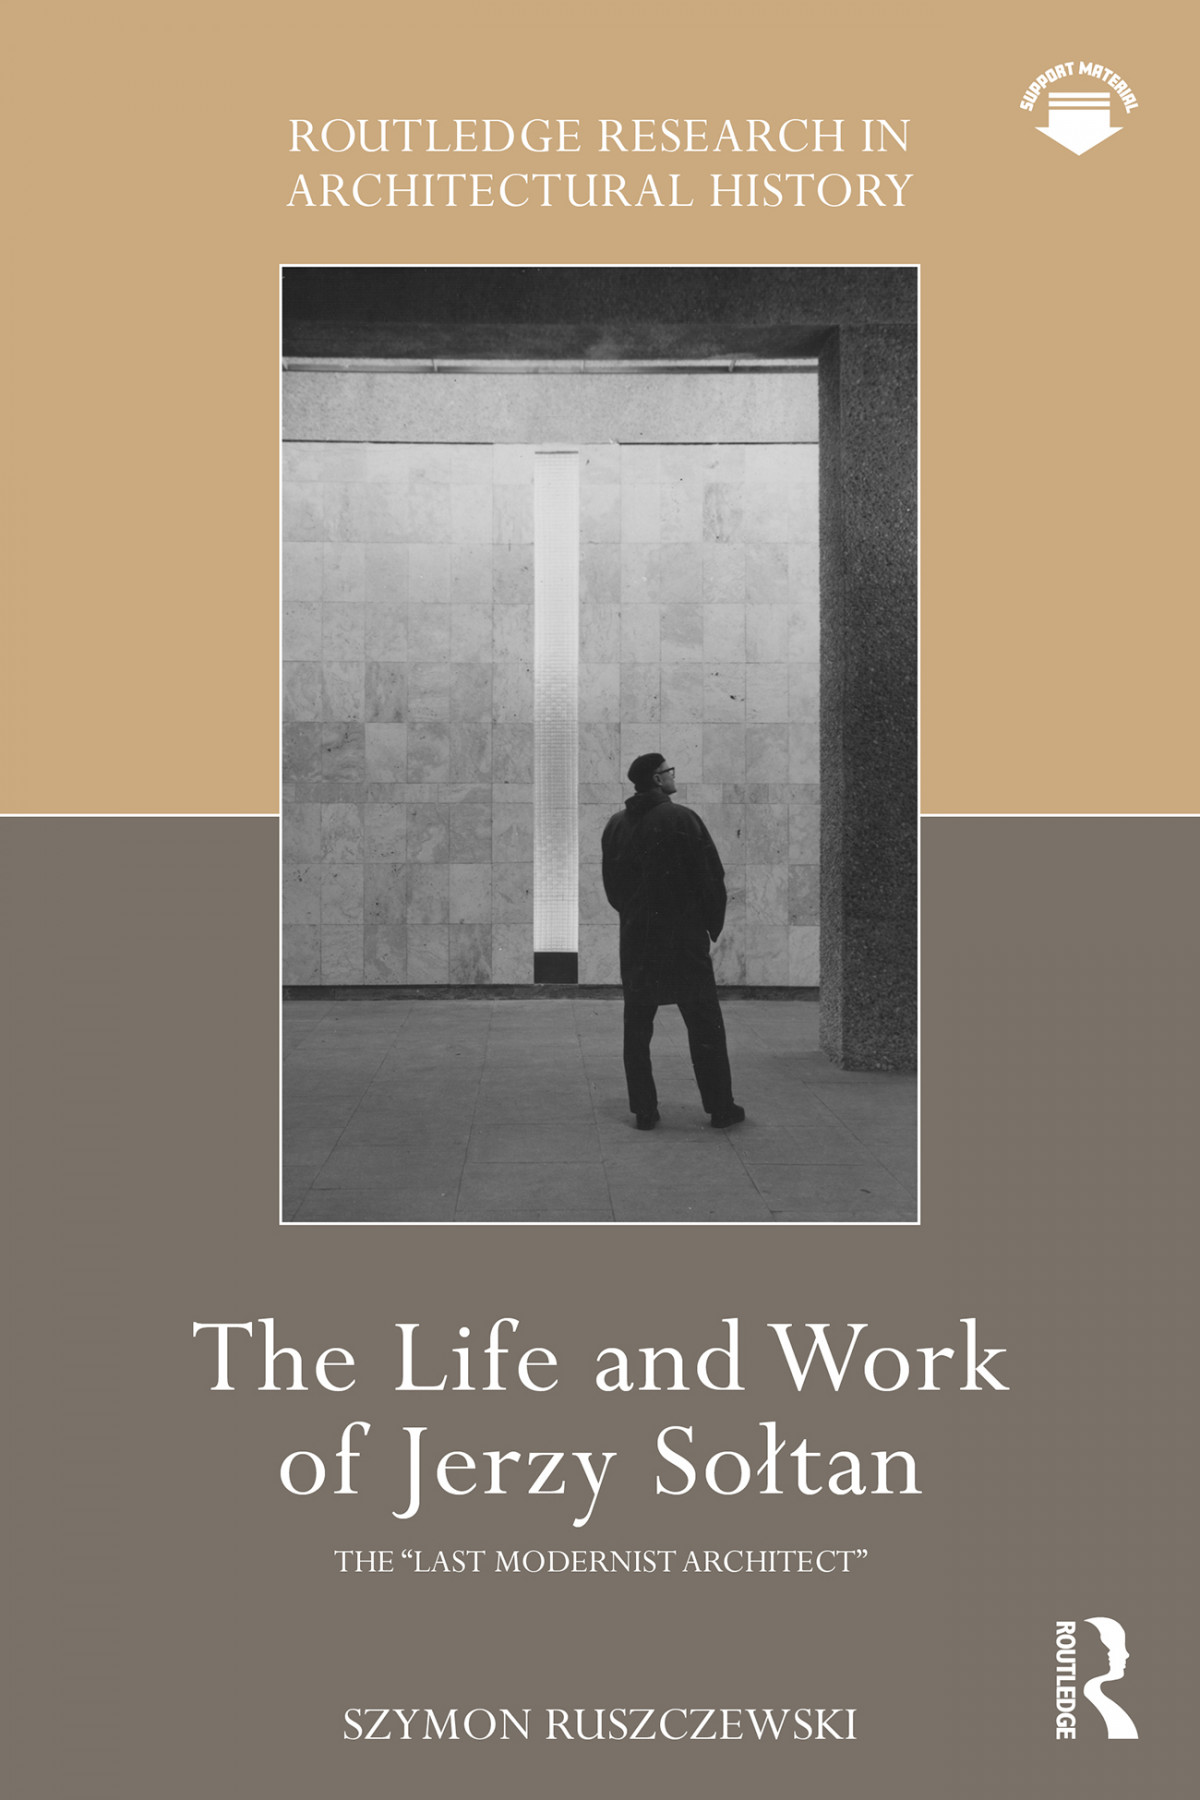 The Life and Work of Jerzy Sołtan